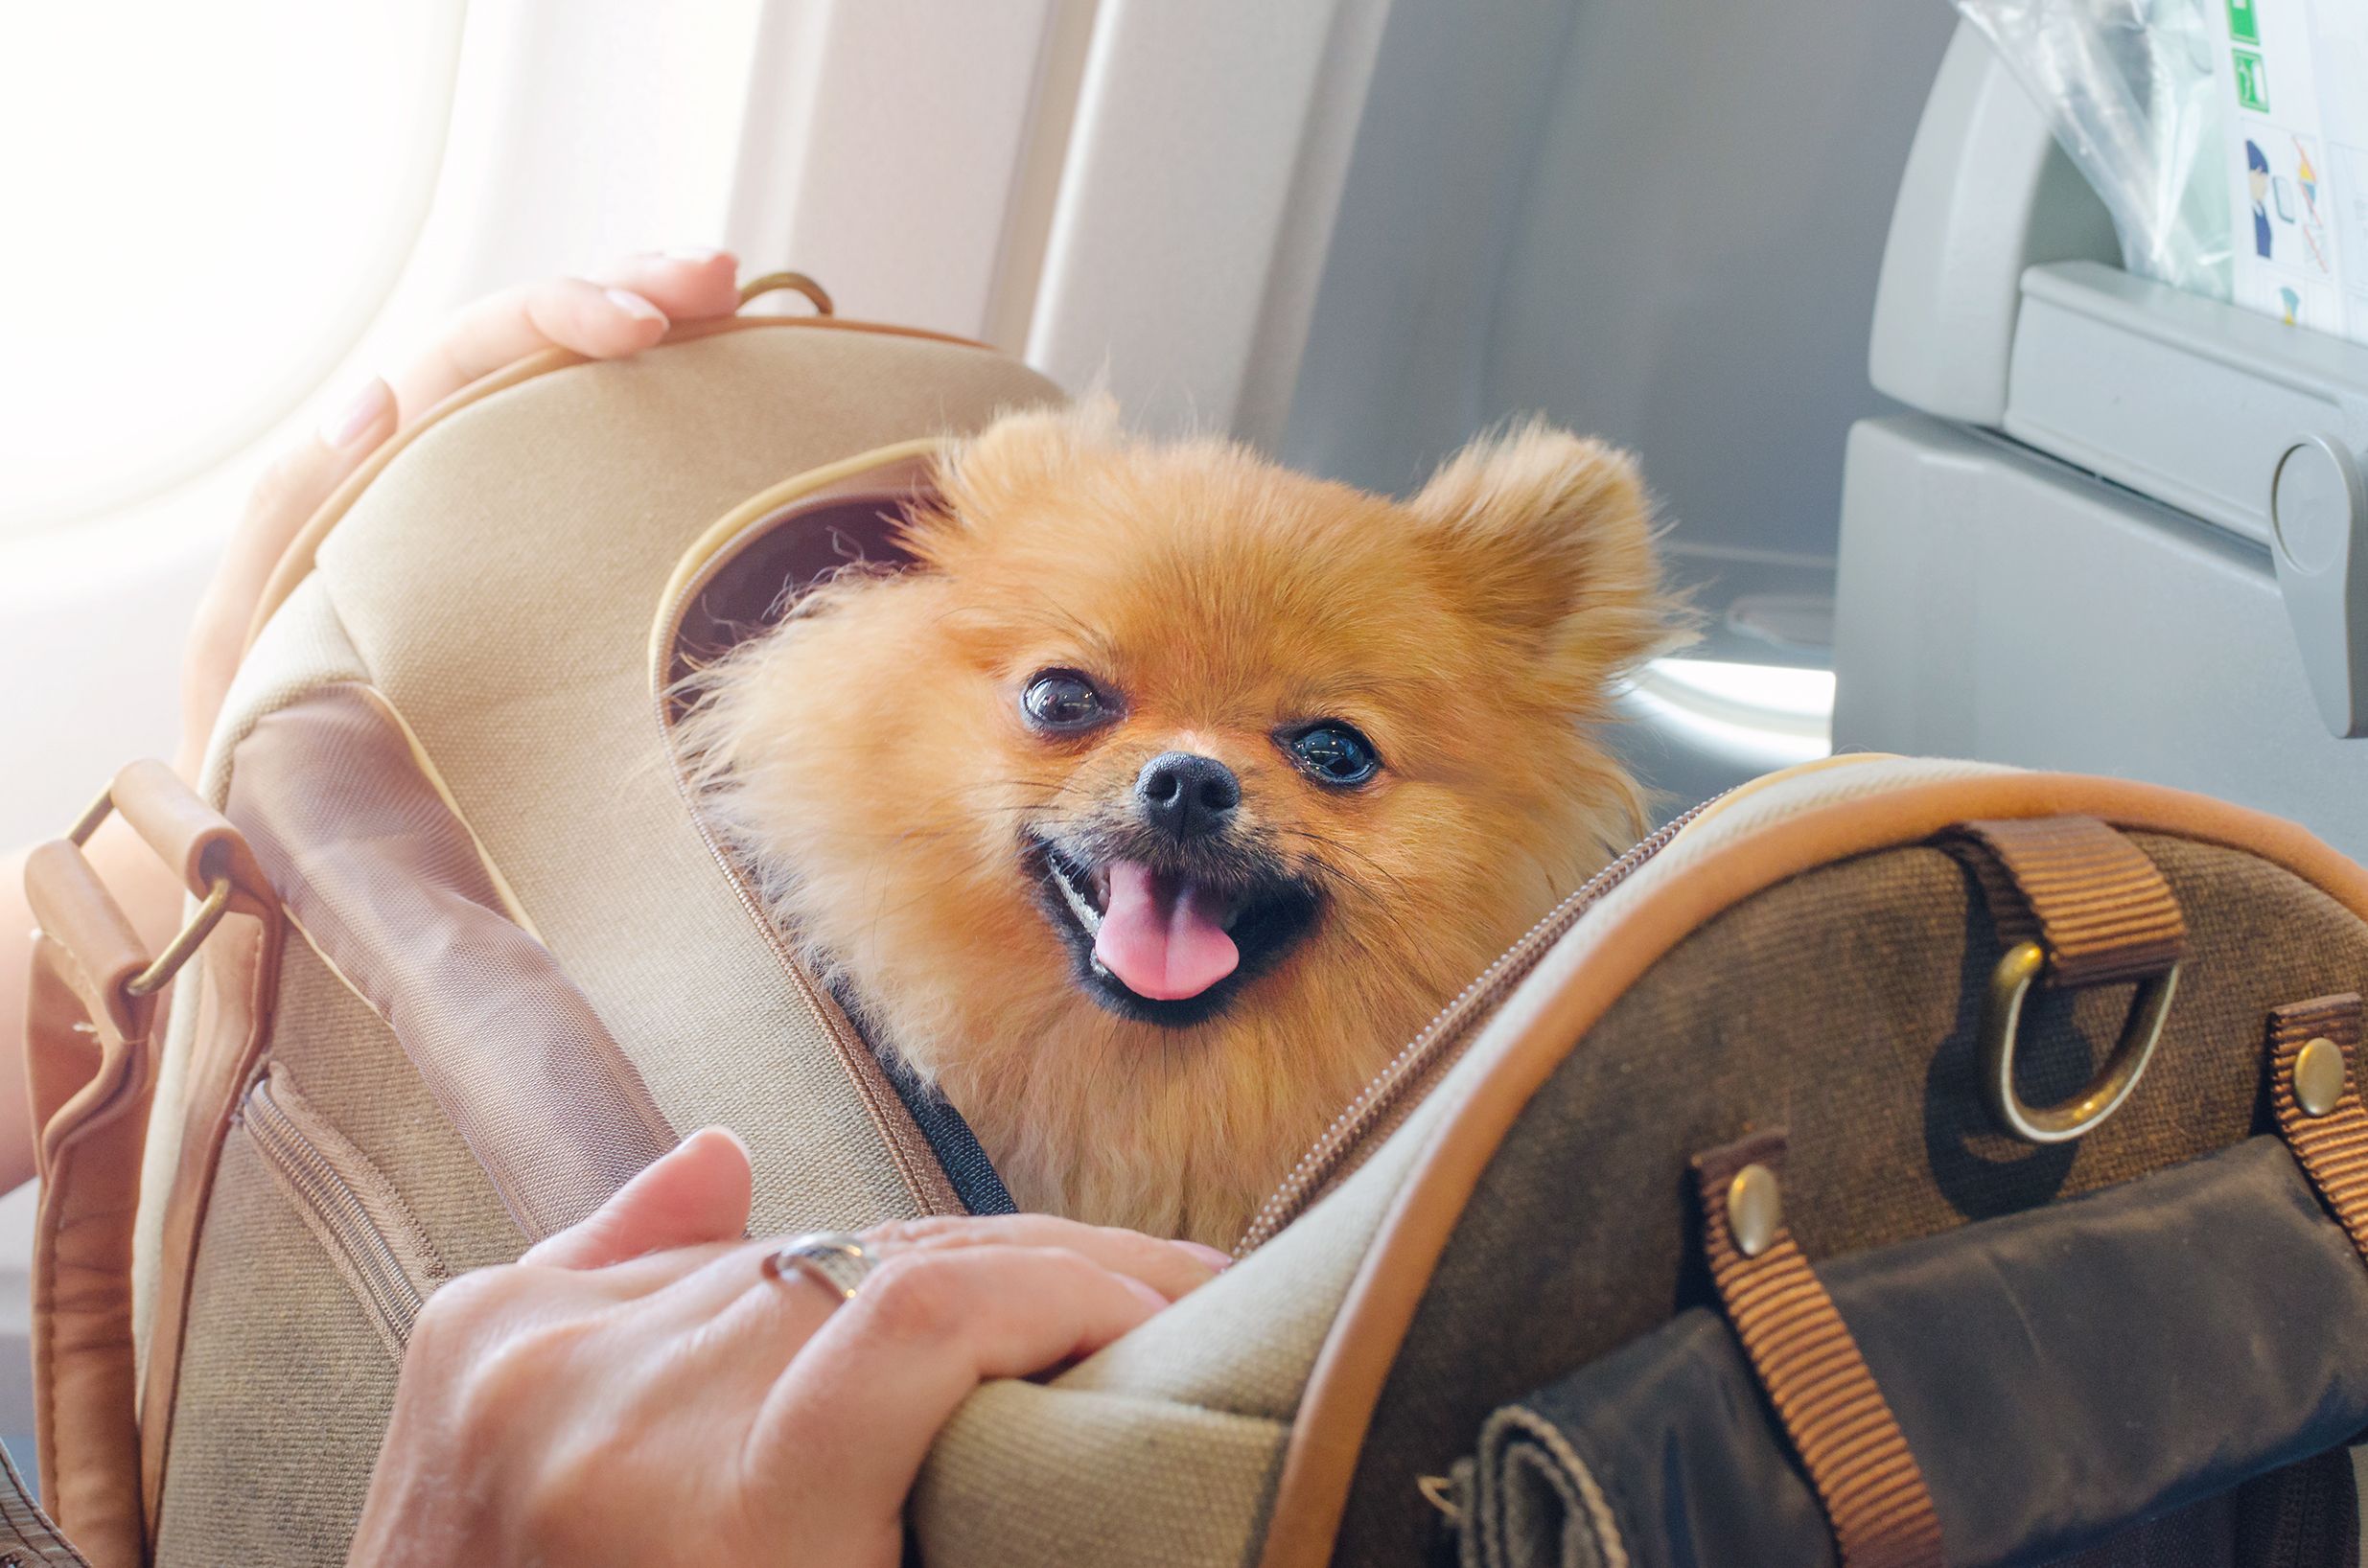 A Dog in a bag onboard an aircraft.